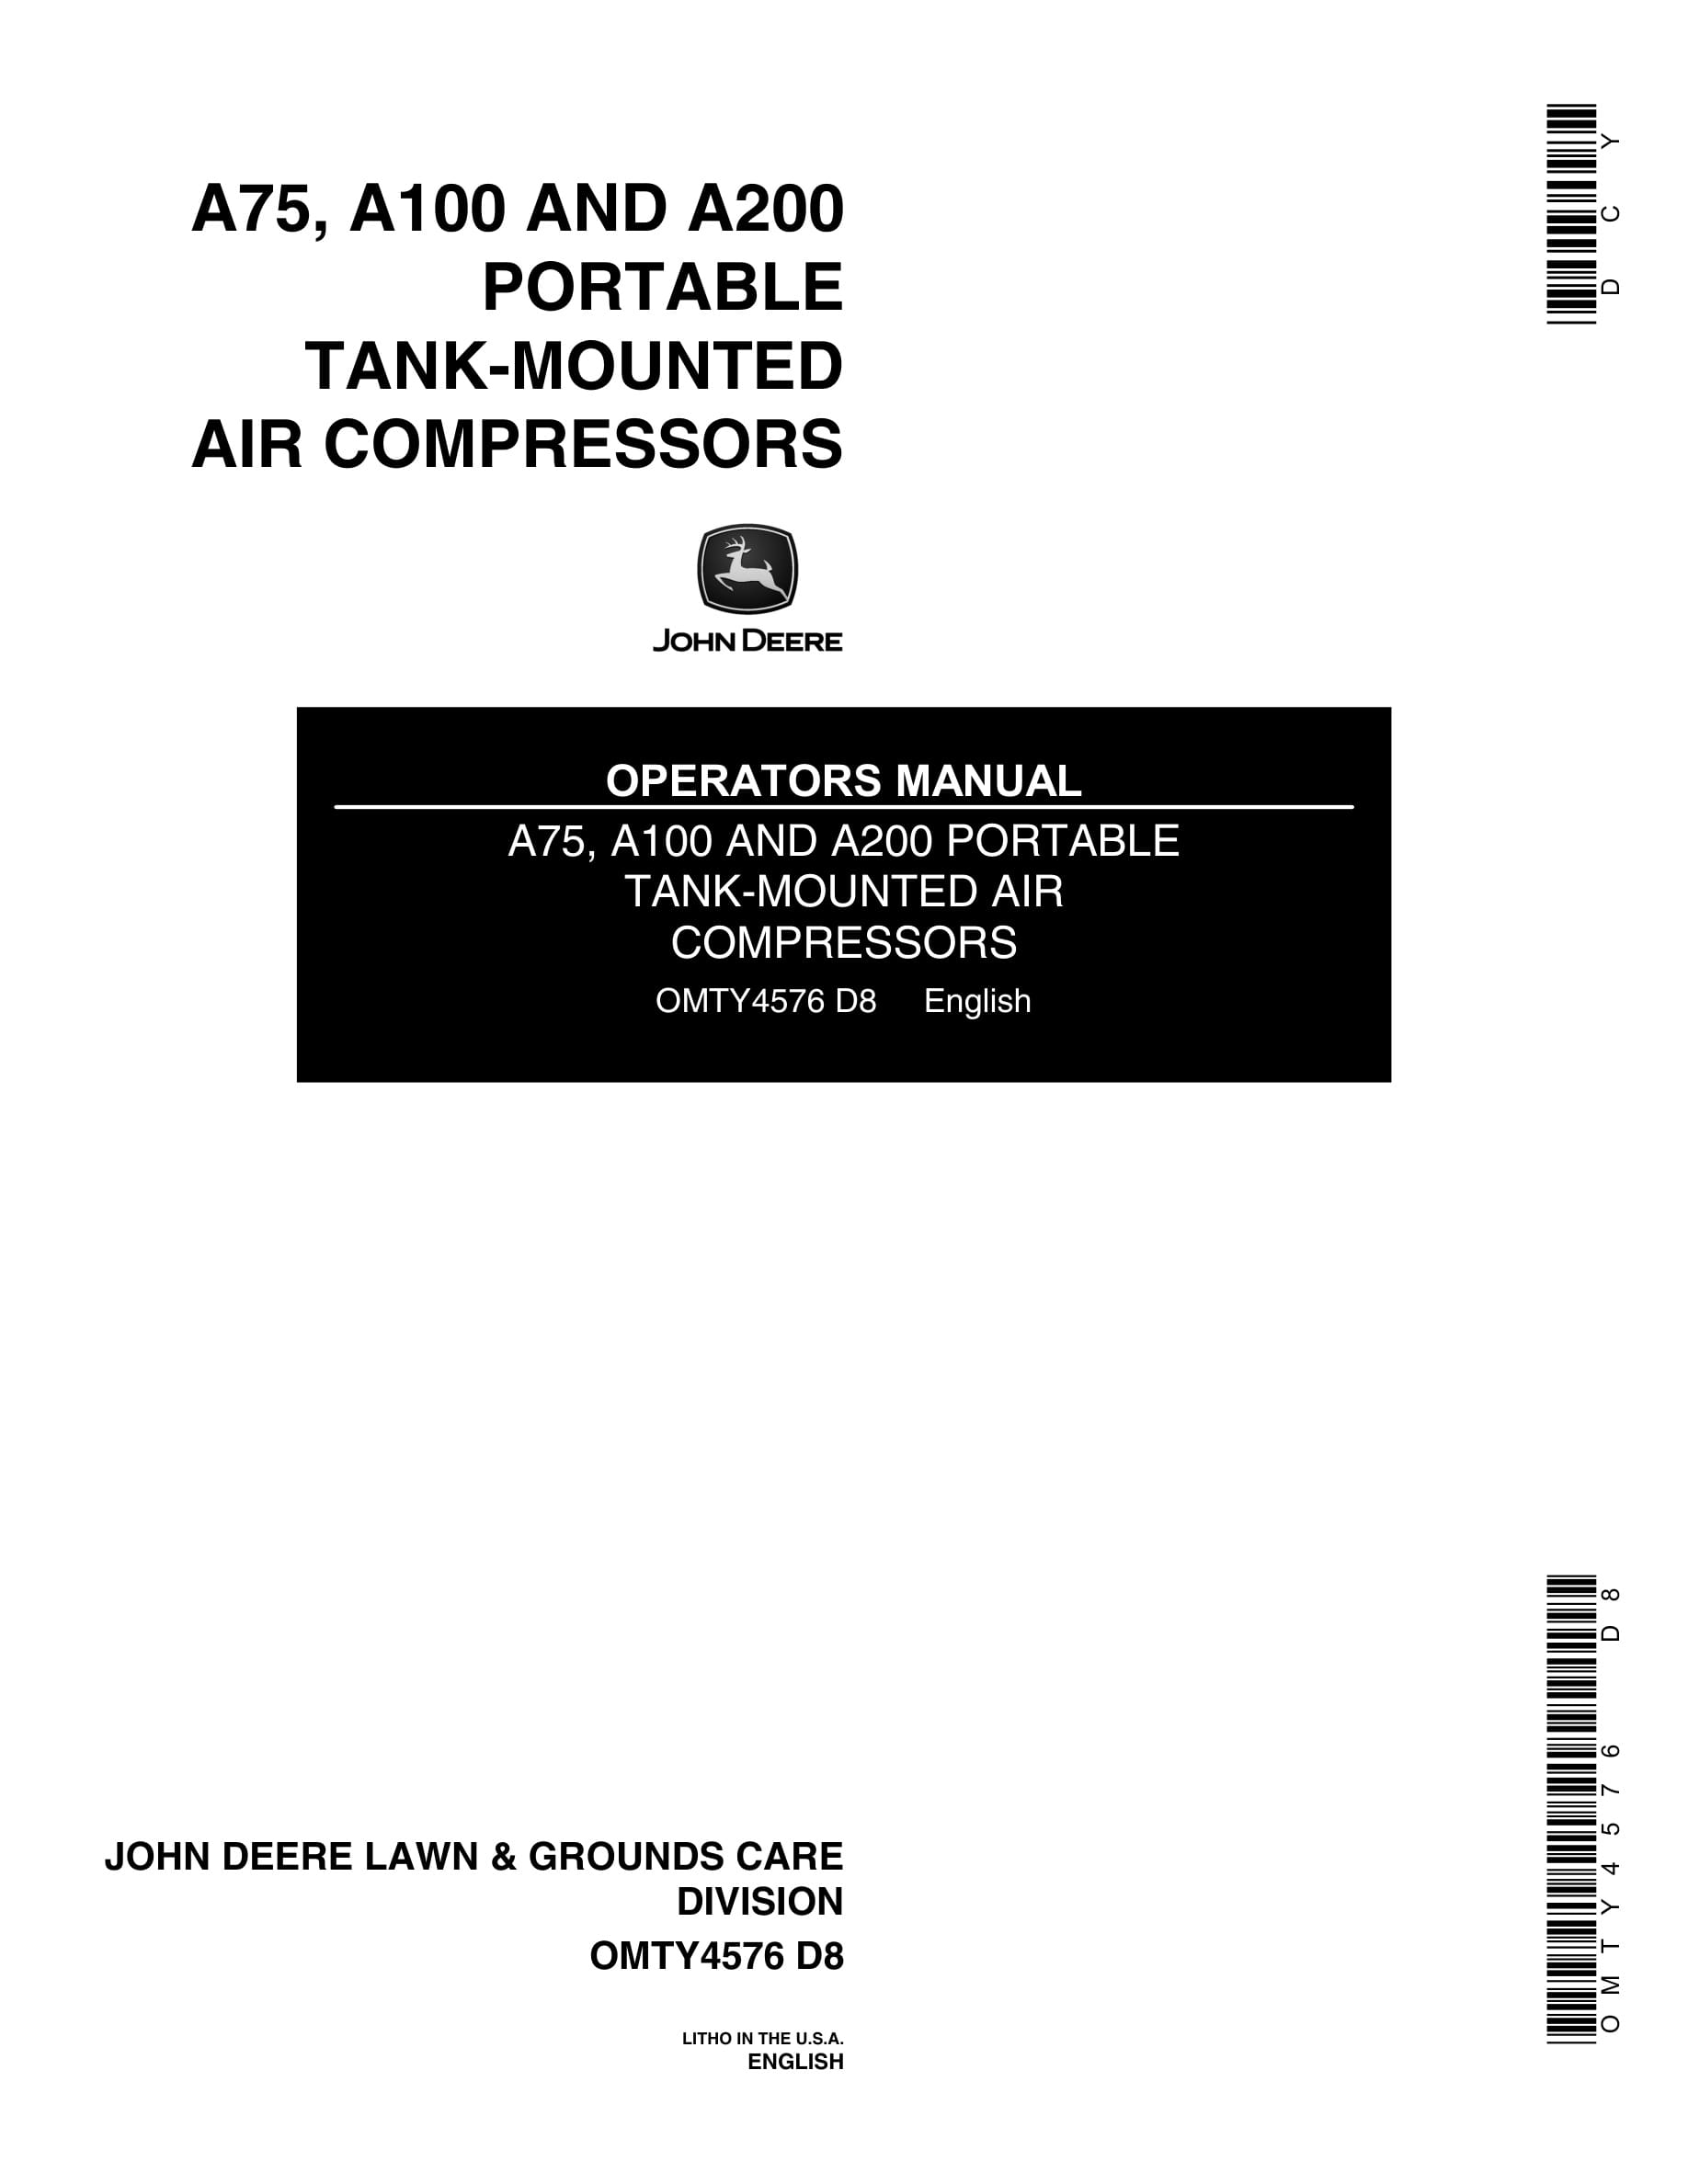 John Deere 75, A100 AND A200 Portable Tank-Mounted Air Compessor Operator Manual OMTY4576-1